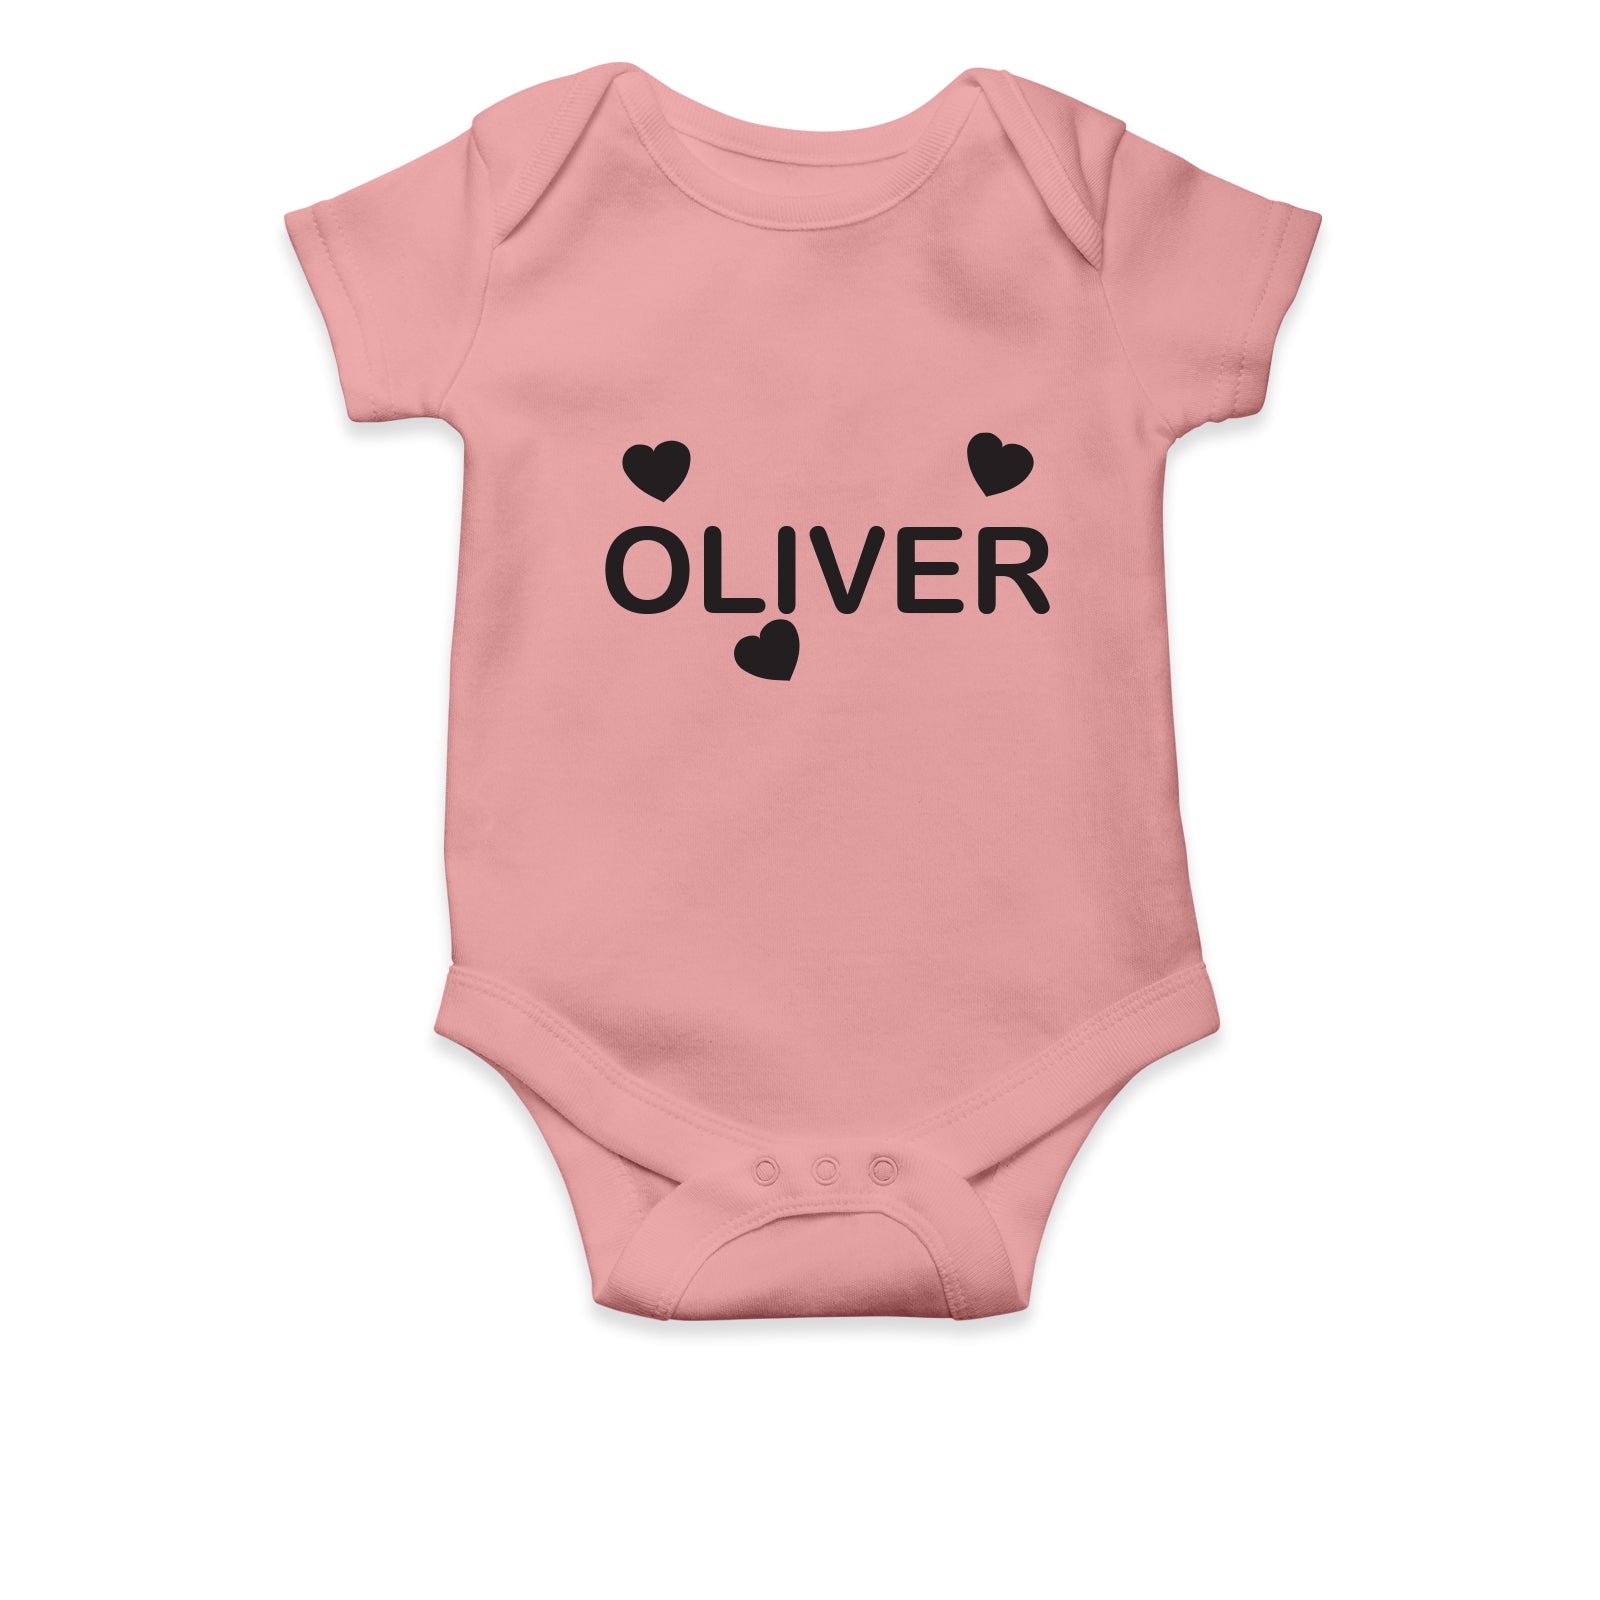 Personalised White Baby Body Suit Grow Vest - Triple Heart